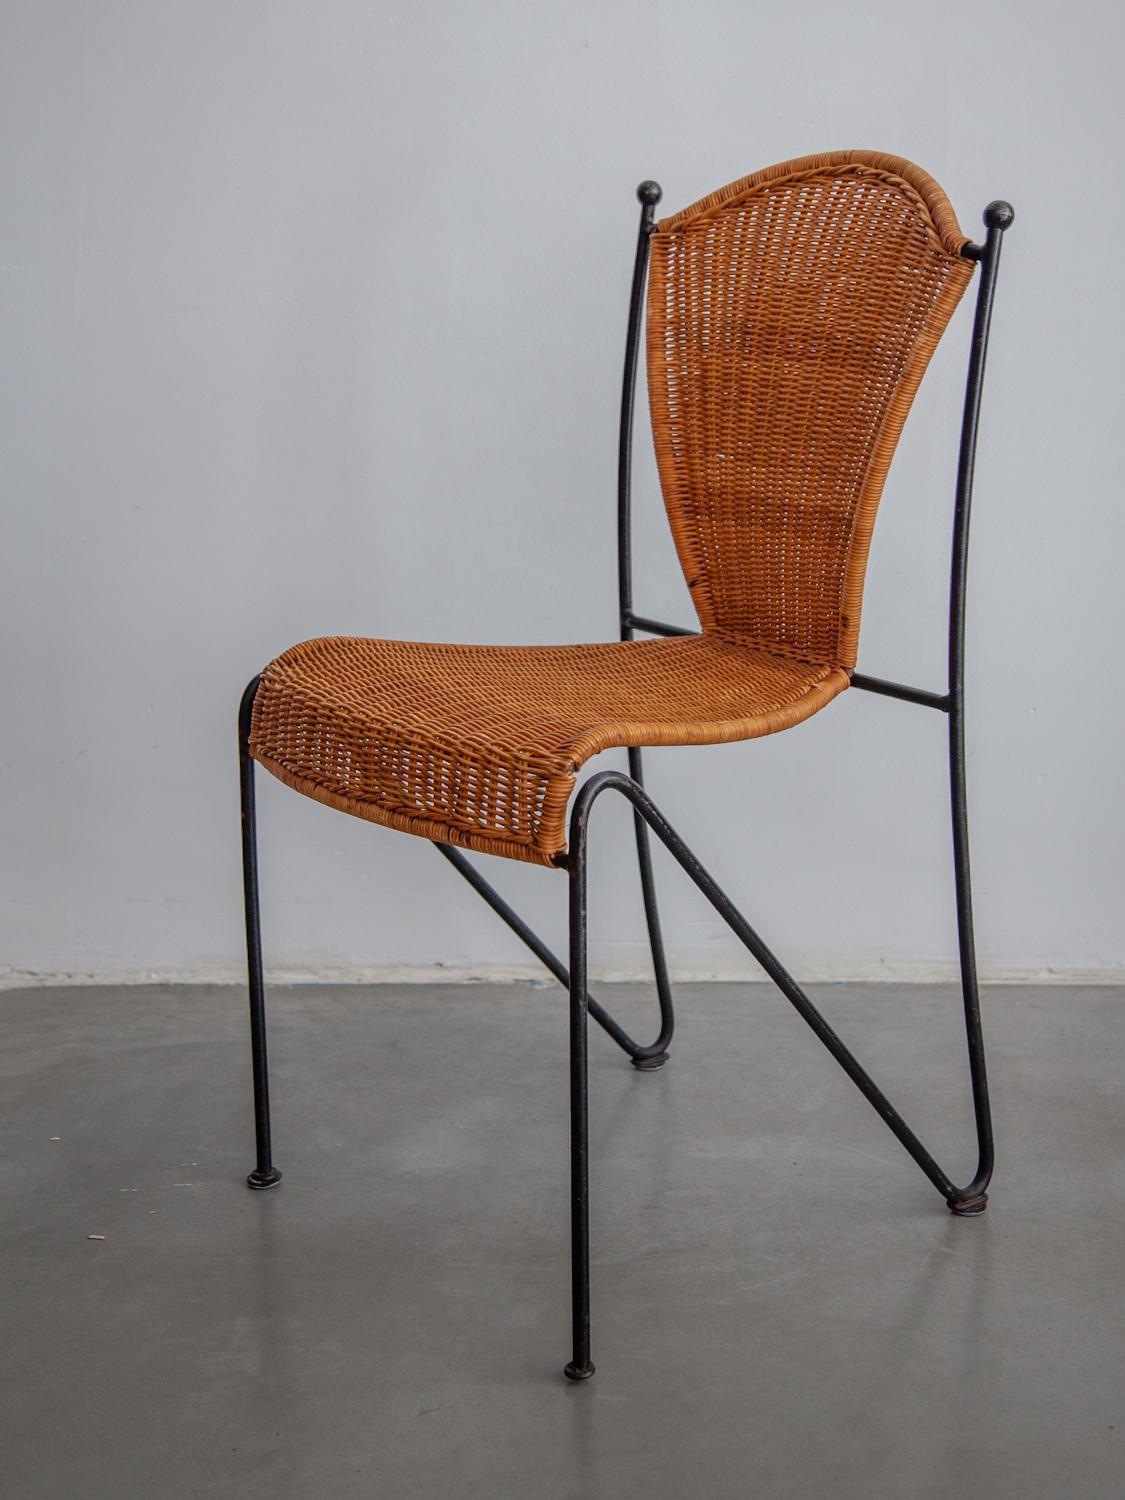 Six Iron and Rattan Indoor and Outdoor Patio Chairs by Pipsan Saarinen Swanson 2